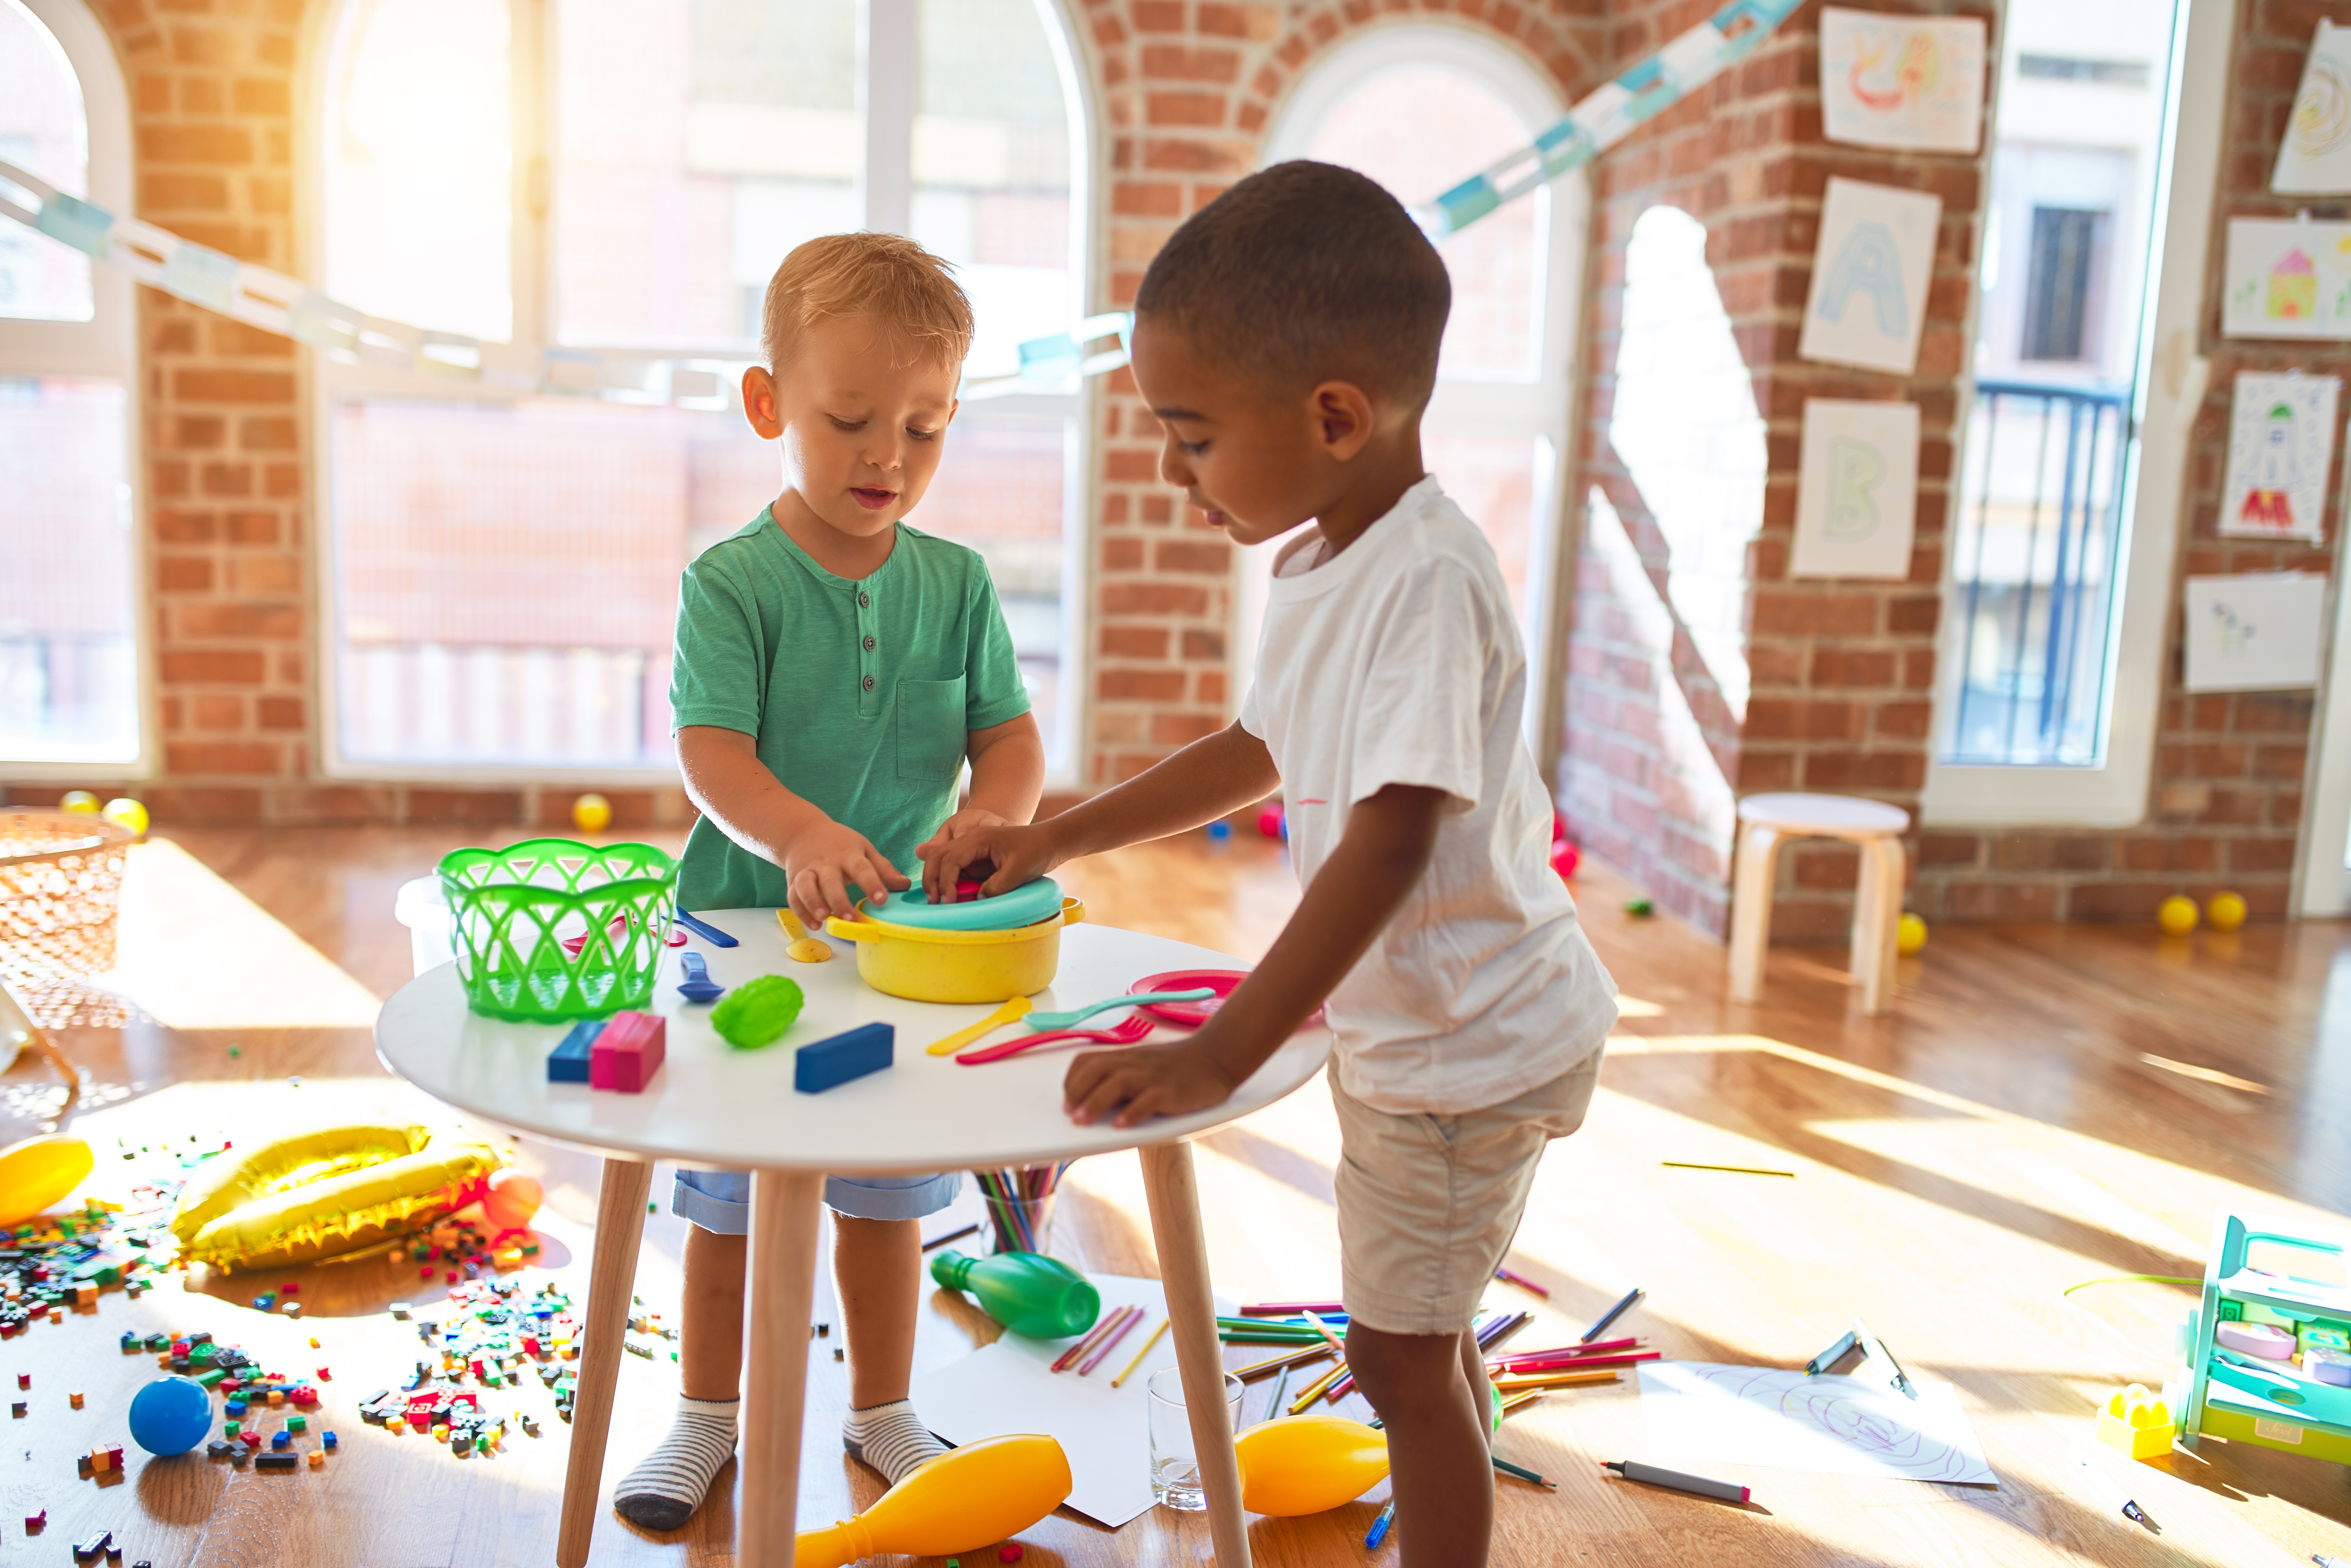 Two boys in child care playing with blocks on a table